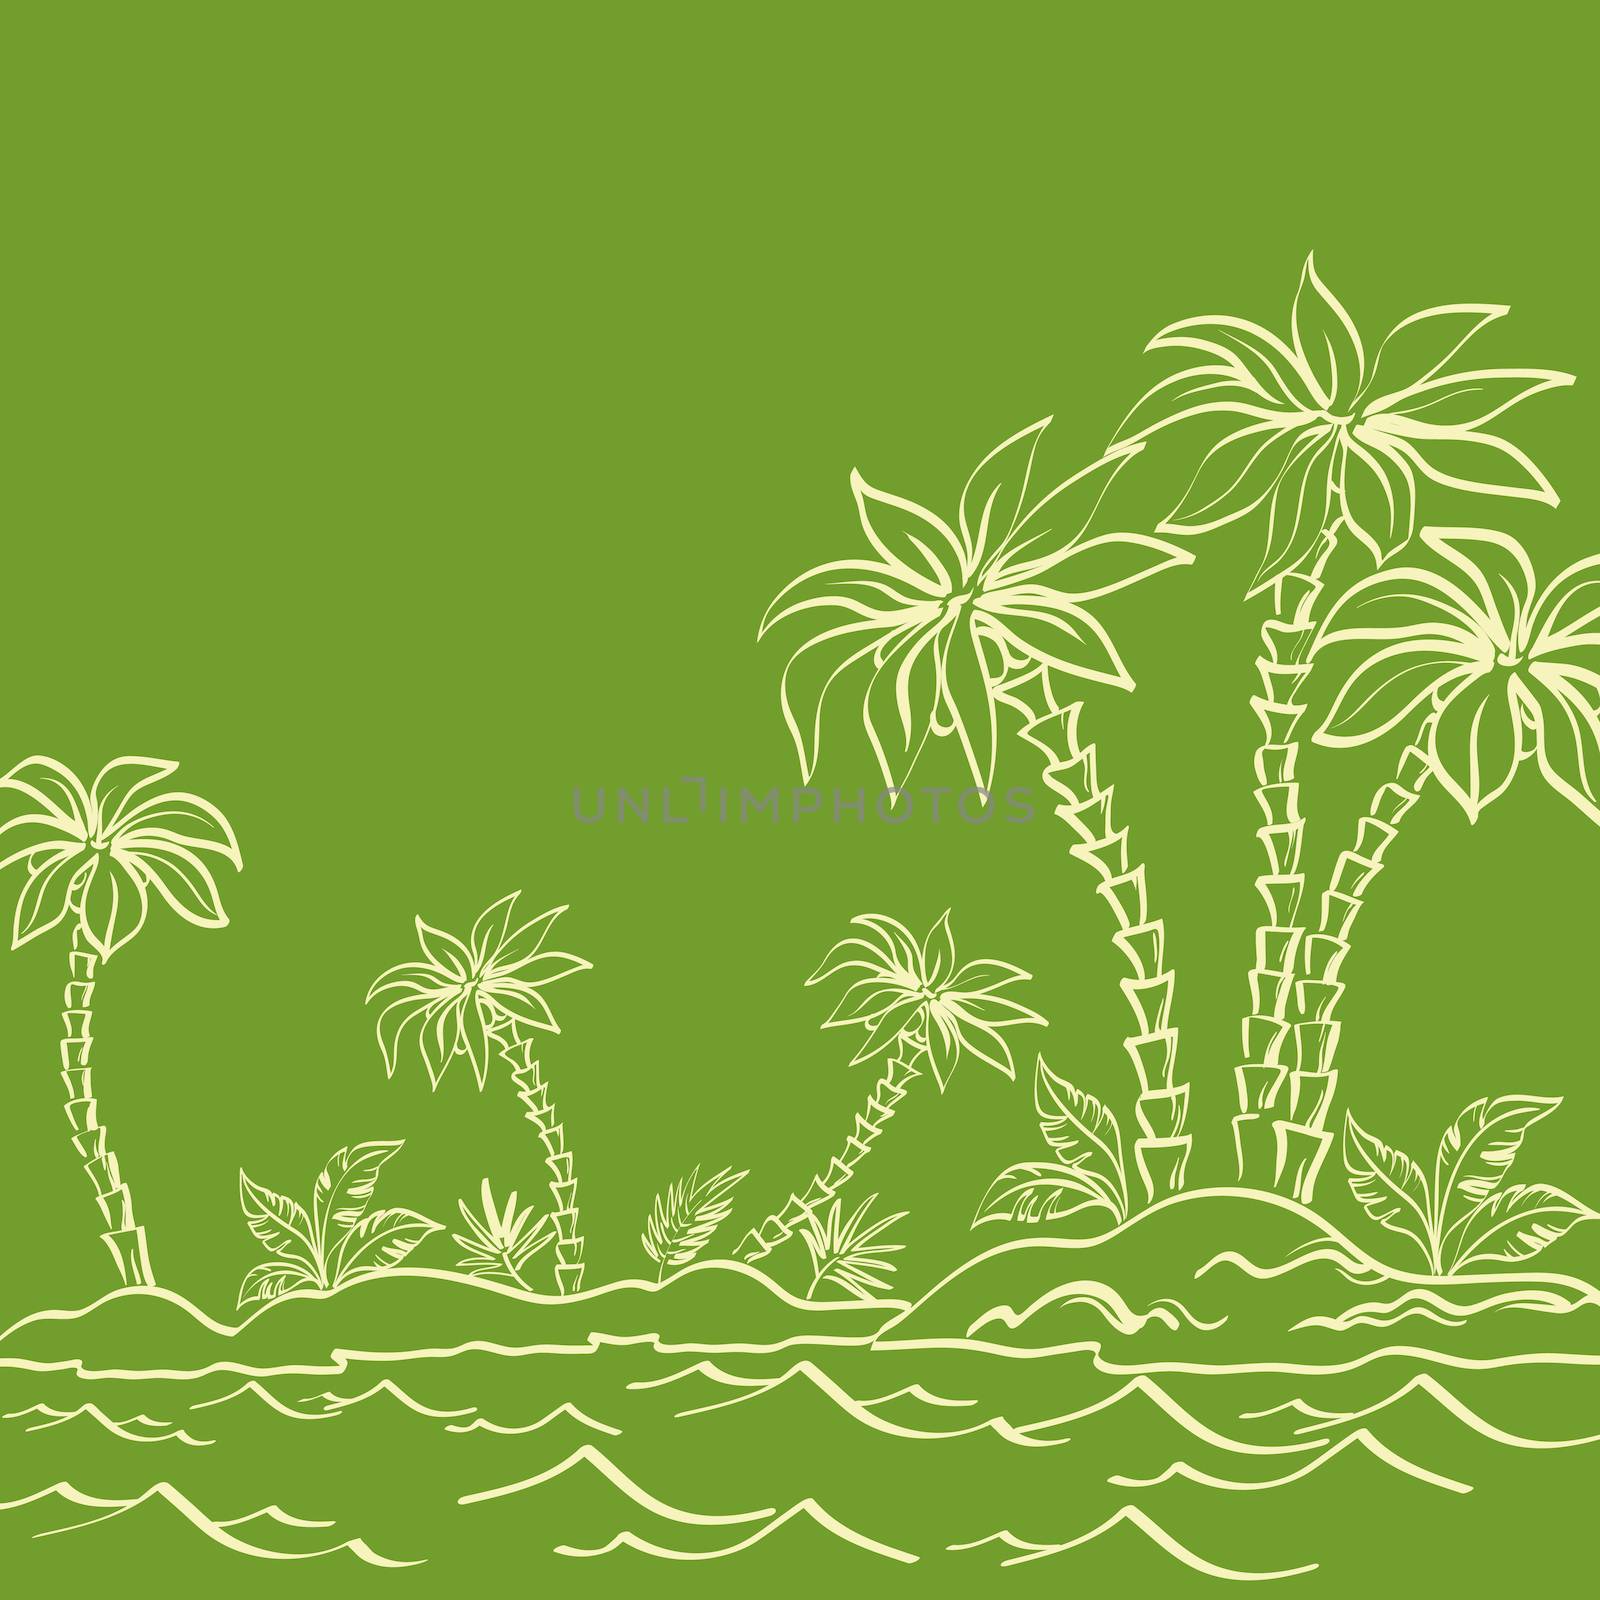 Sea island with palm trees contours on green by alexcoolok